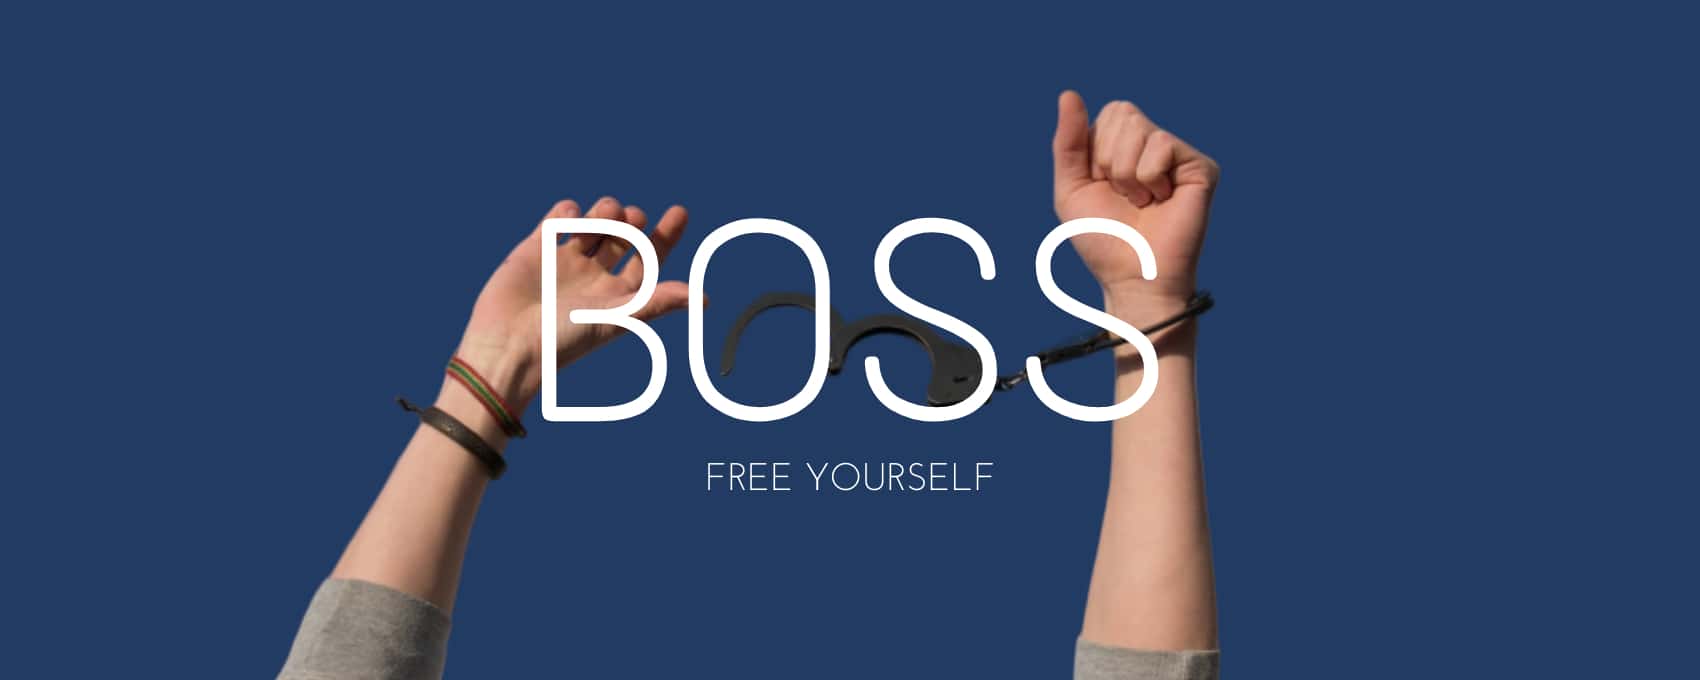 How To Be Your Own Boss: Tips and Tricks To Free Yourselves